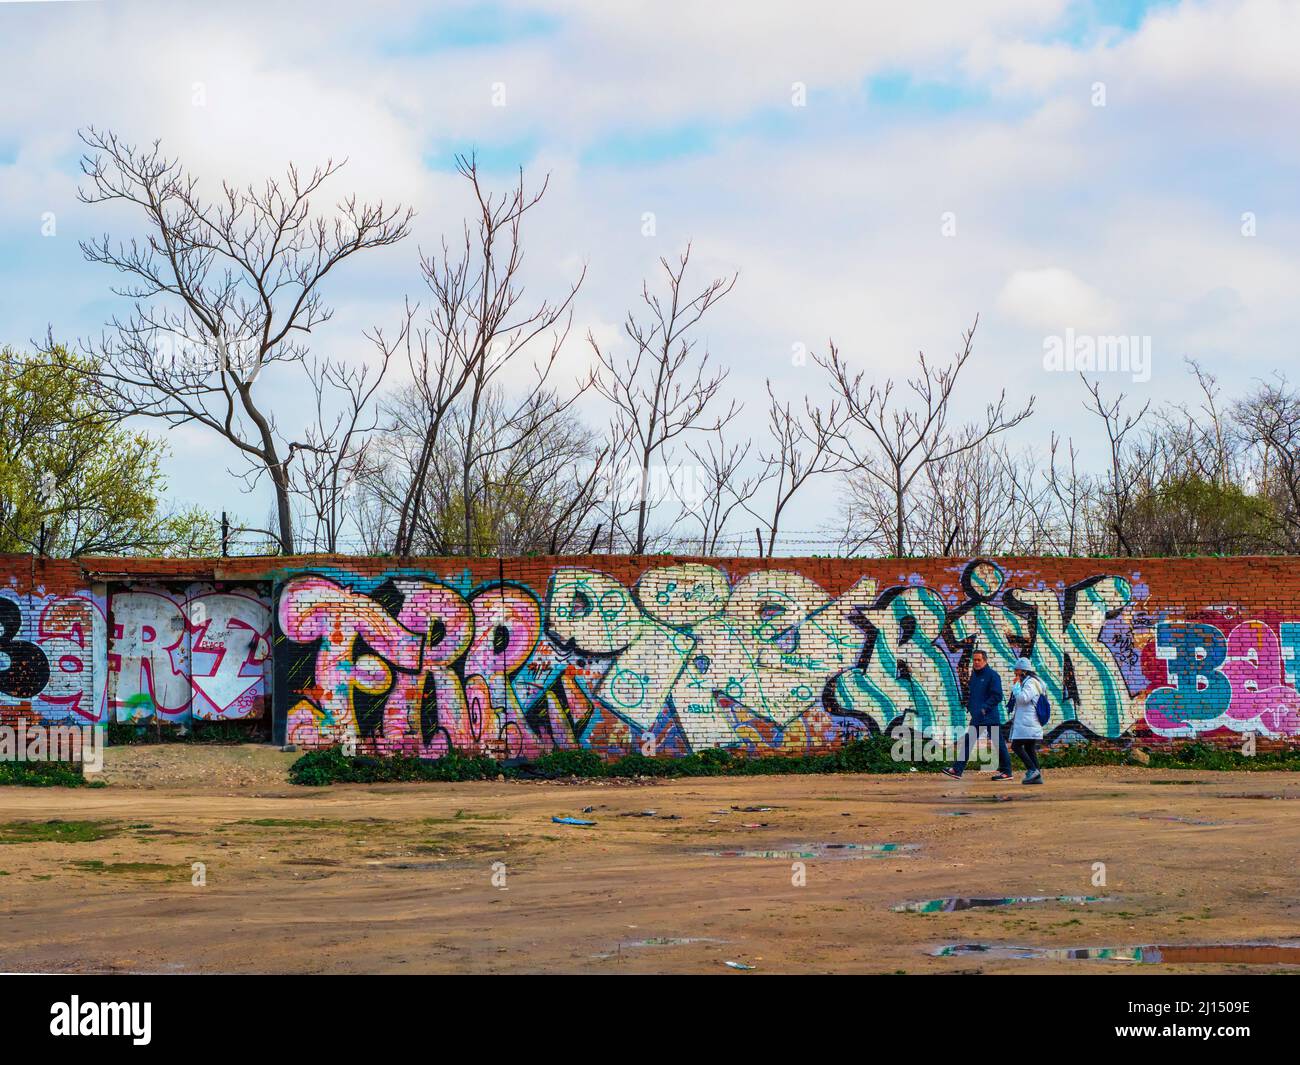 A heterosexual couple walks through an open field in front of a wall with graffiti. Stock Photo